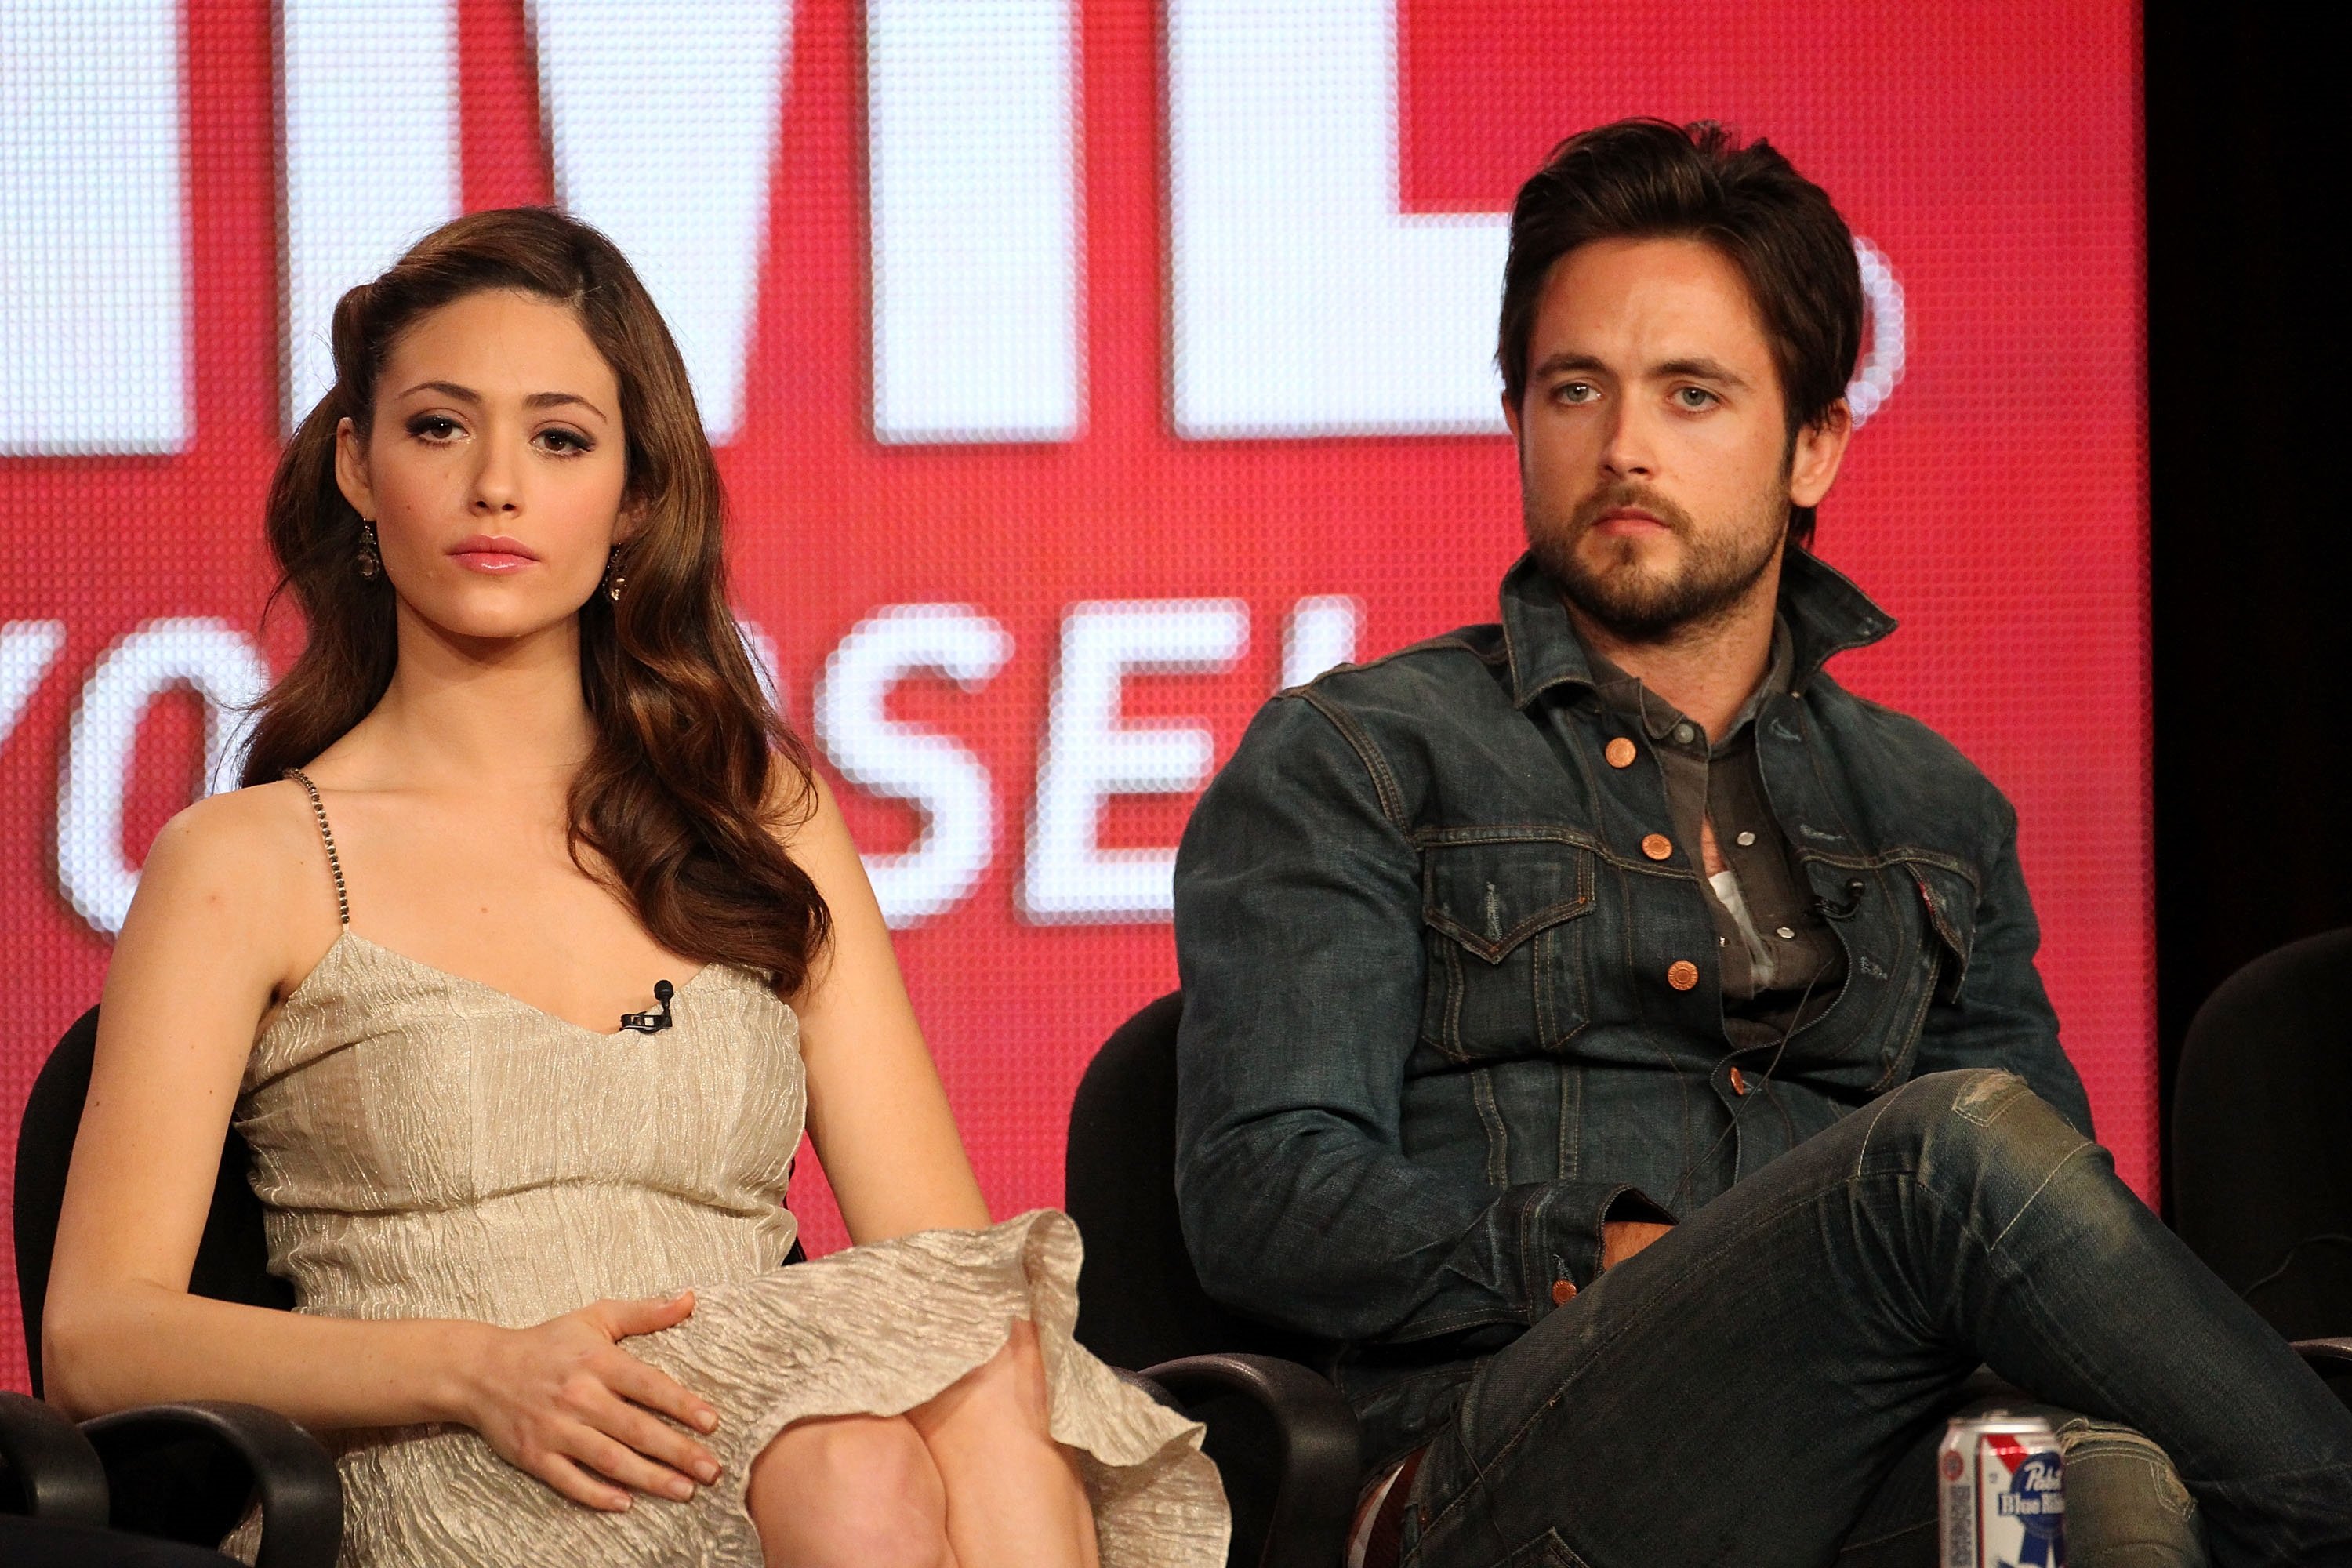 Shameless cast members Emmy Rossum and Justin Chatwin